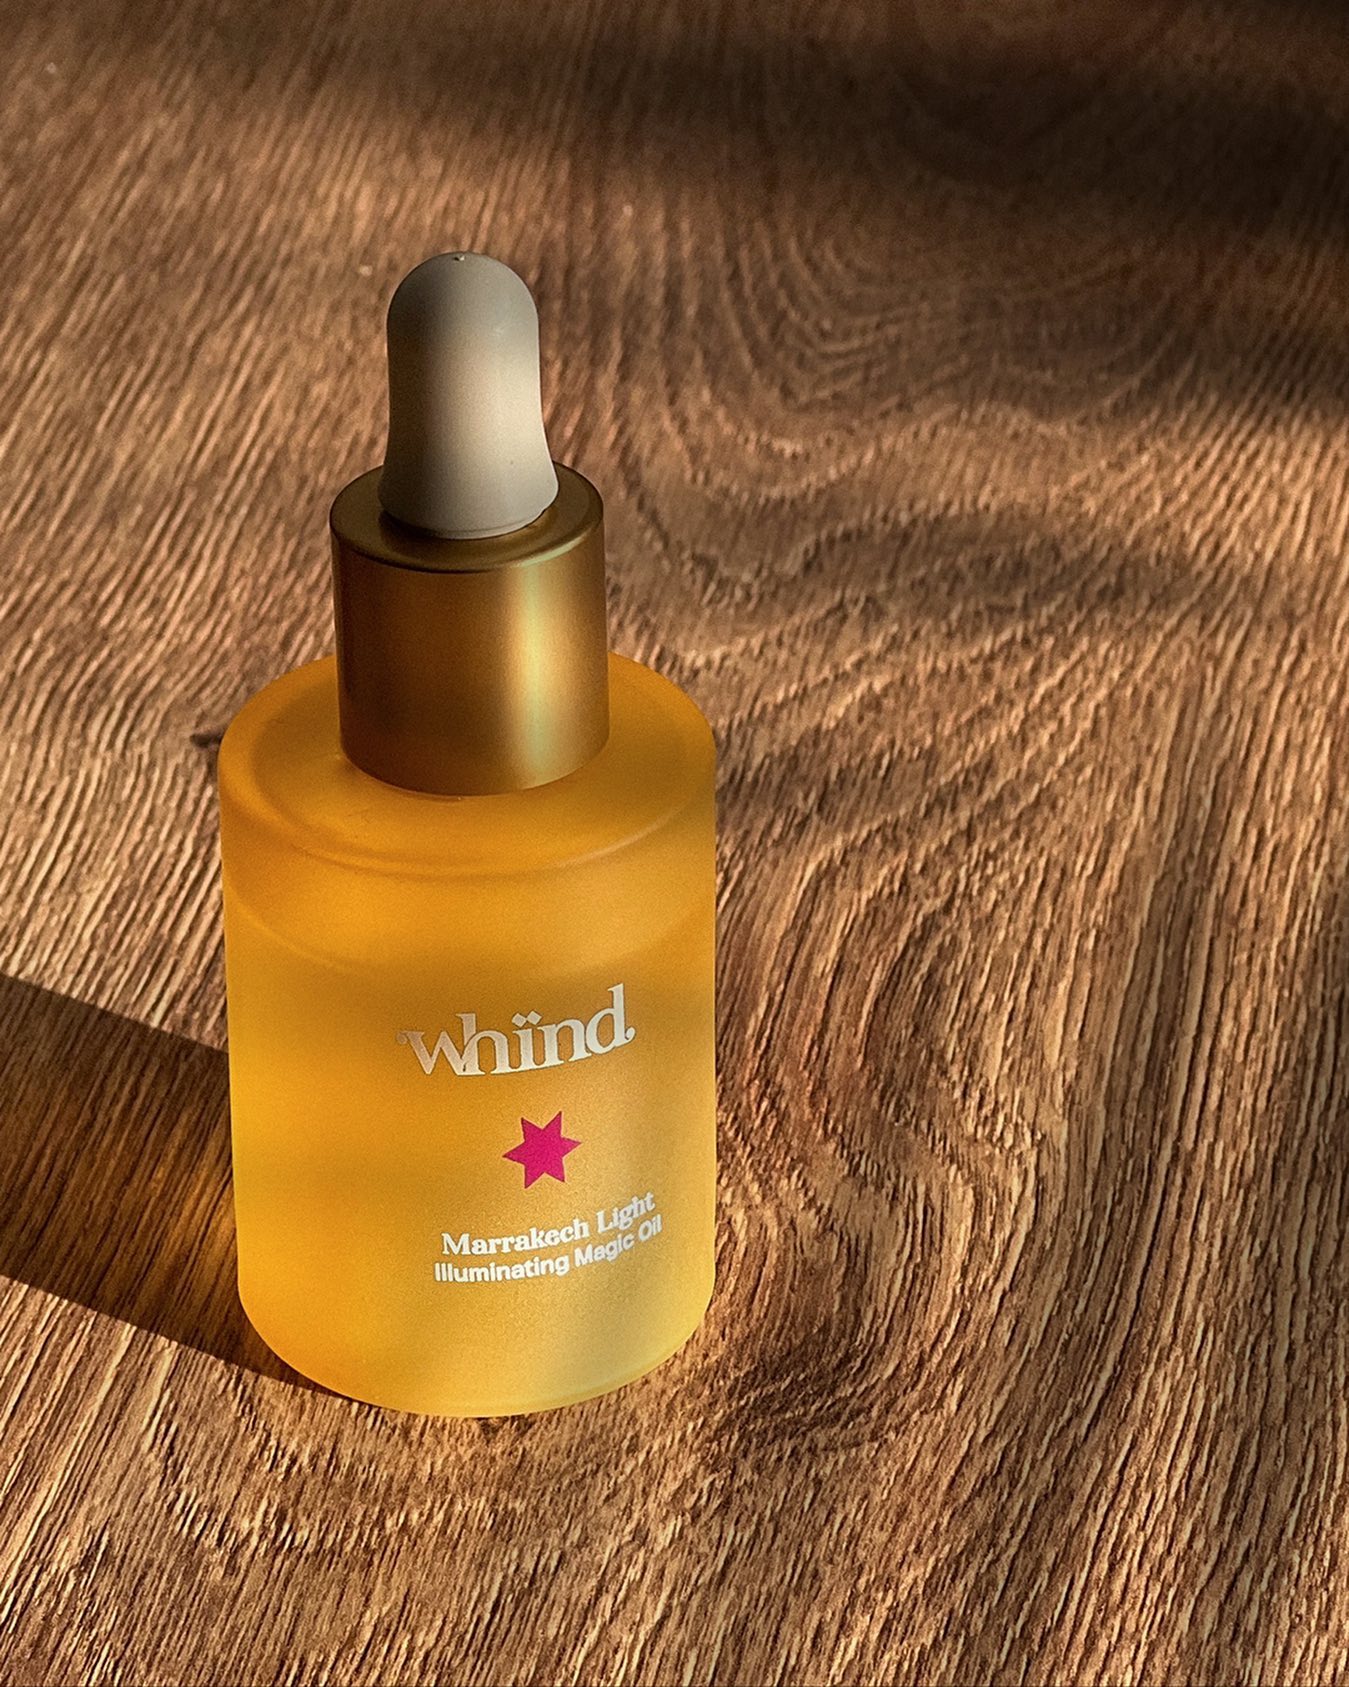 ad/pr* • @whind Marrakech Light Illuminating Magic Oil* - a lightweight oil that deeply nourishes even the driest of skins ✨

TEXTURE
The oil is very thin and light in consistency, I find 2 drops is easily massaged across my face without any drag or tugging of the skin. The oil absorbs in to the skin super quickly, leaving behind a beautiful healthy glow but no heavy or greasy feeling. 

SKIN TYPES
The Marrakech Light Illuminating Magic Oil is non-comedogenic and suitable for all skin types. 

For 4 of the 7 weeks I’ve been using this, I was on Isotretinoin/Accutane which left me with extremely dry and cracked skin on my chin and sides of my nose. I found this oil soothing, nourishing and never irritating those on patches where my skin was really struggling.

Before Accutane, my skin was extremely oily and I found many oils very thick and heavy feeling on my skin, so I know this struggle of finding a good one! If you have oily skin, I think you’d like the Marrakech Light oil - it feels weightless on the skin. Also, their Atlas Pure detoxifying clay mask is *incredible*. 

WHEN TO USE
You can use this oil daily, morning and evening. For my morning routine, I like to add 1 drop into my moisturiser if my skin is feeling dry and I want some extra glow that day. At night, I apply 3-4 drops after my moisturiser (and breathe in the heavenly amber scent). 

INGREDIENTS (from whind.com)
• Argan Oil: Hydrating, regenerating, restructuring and skin-softening.
• Jojoba Oil: The super hydrator.
• Almond Oil: Soothes and conditions the skin.
• Desert Date Oil: Known for dry touch and quick penetration.
• Apricot Oil: The antioxidant powerhouse.
• Olive Oil Complex: The super-sinking natural alternative to silicone.
• Prickly Pear Oil: Helps build skin's moisture barrier.
• Meadowfoam Oil: Rich in unsaturated fatty acids, it can repair the skin.
• Crambe Abyssinica Seed Oil: Nourishes skin without any greasy after-feel.
• Amber: Naturally scented. A hypnotic and warm scent, evocative of sun-kissed climes.

#WhindGlow

ad info: pr product*, not paid/sponsored.